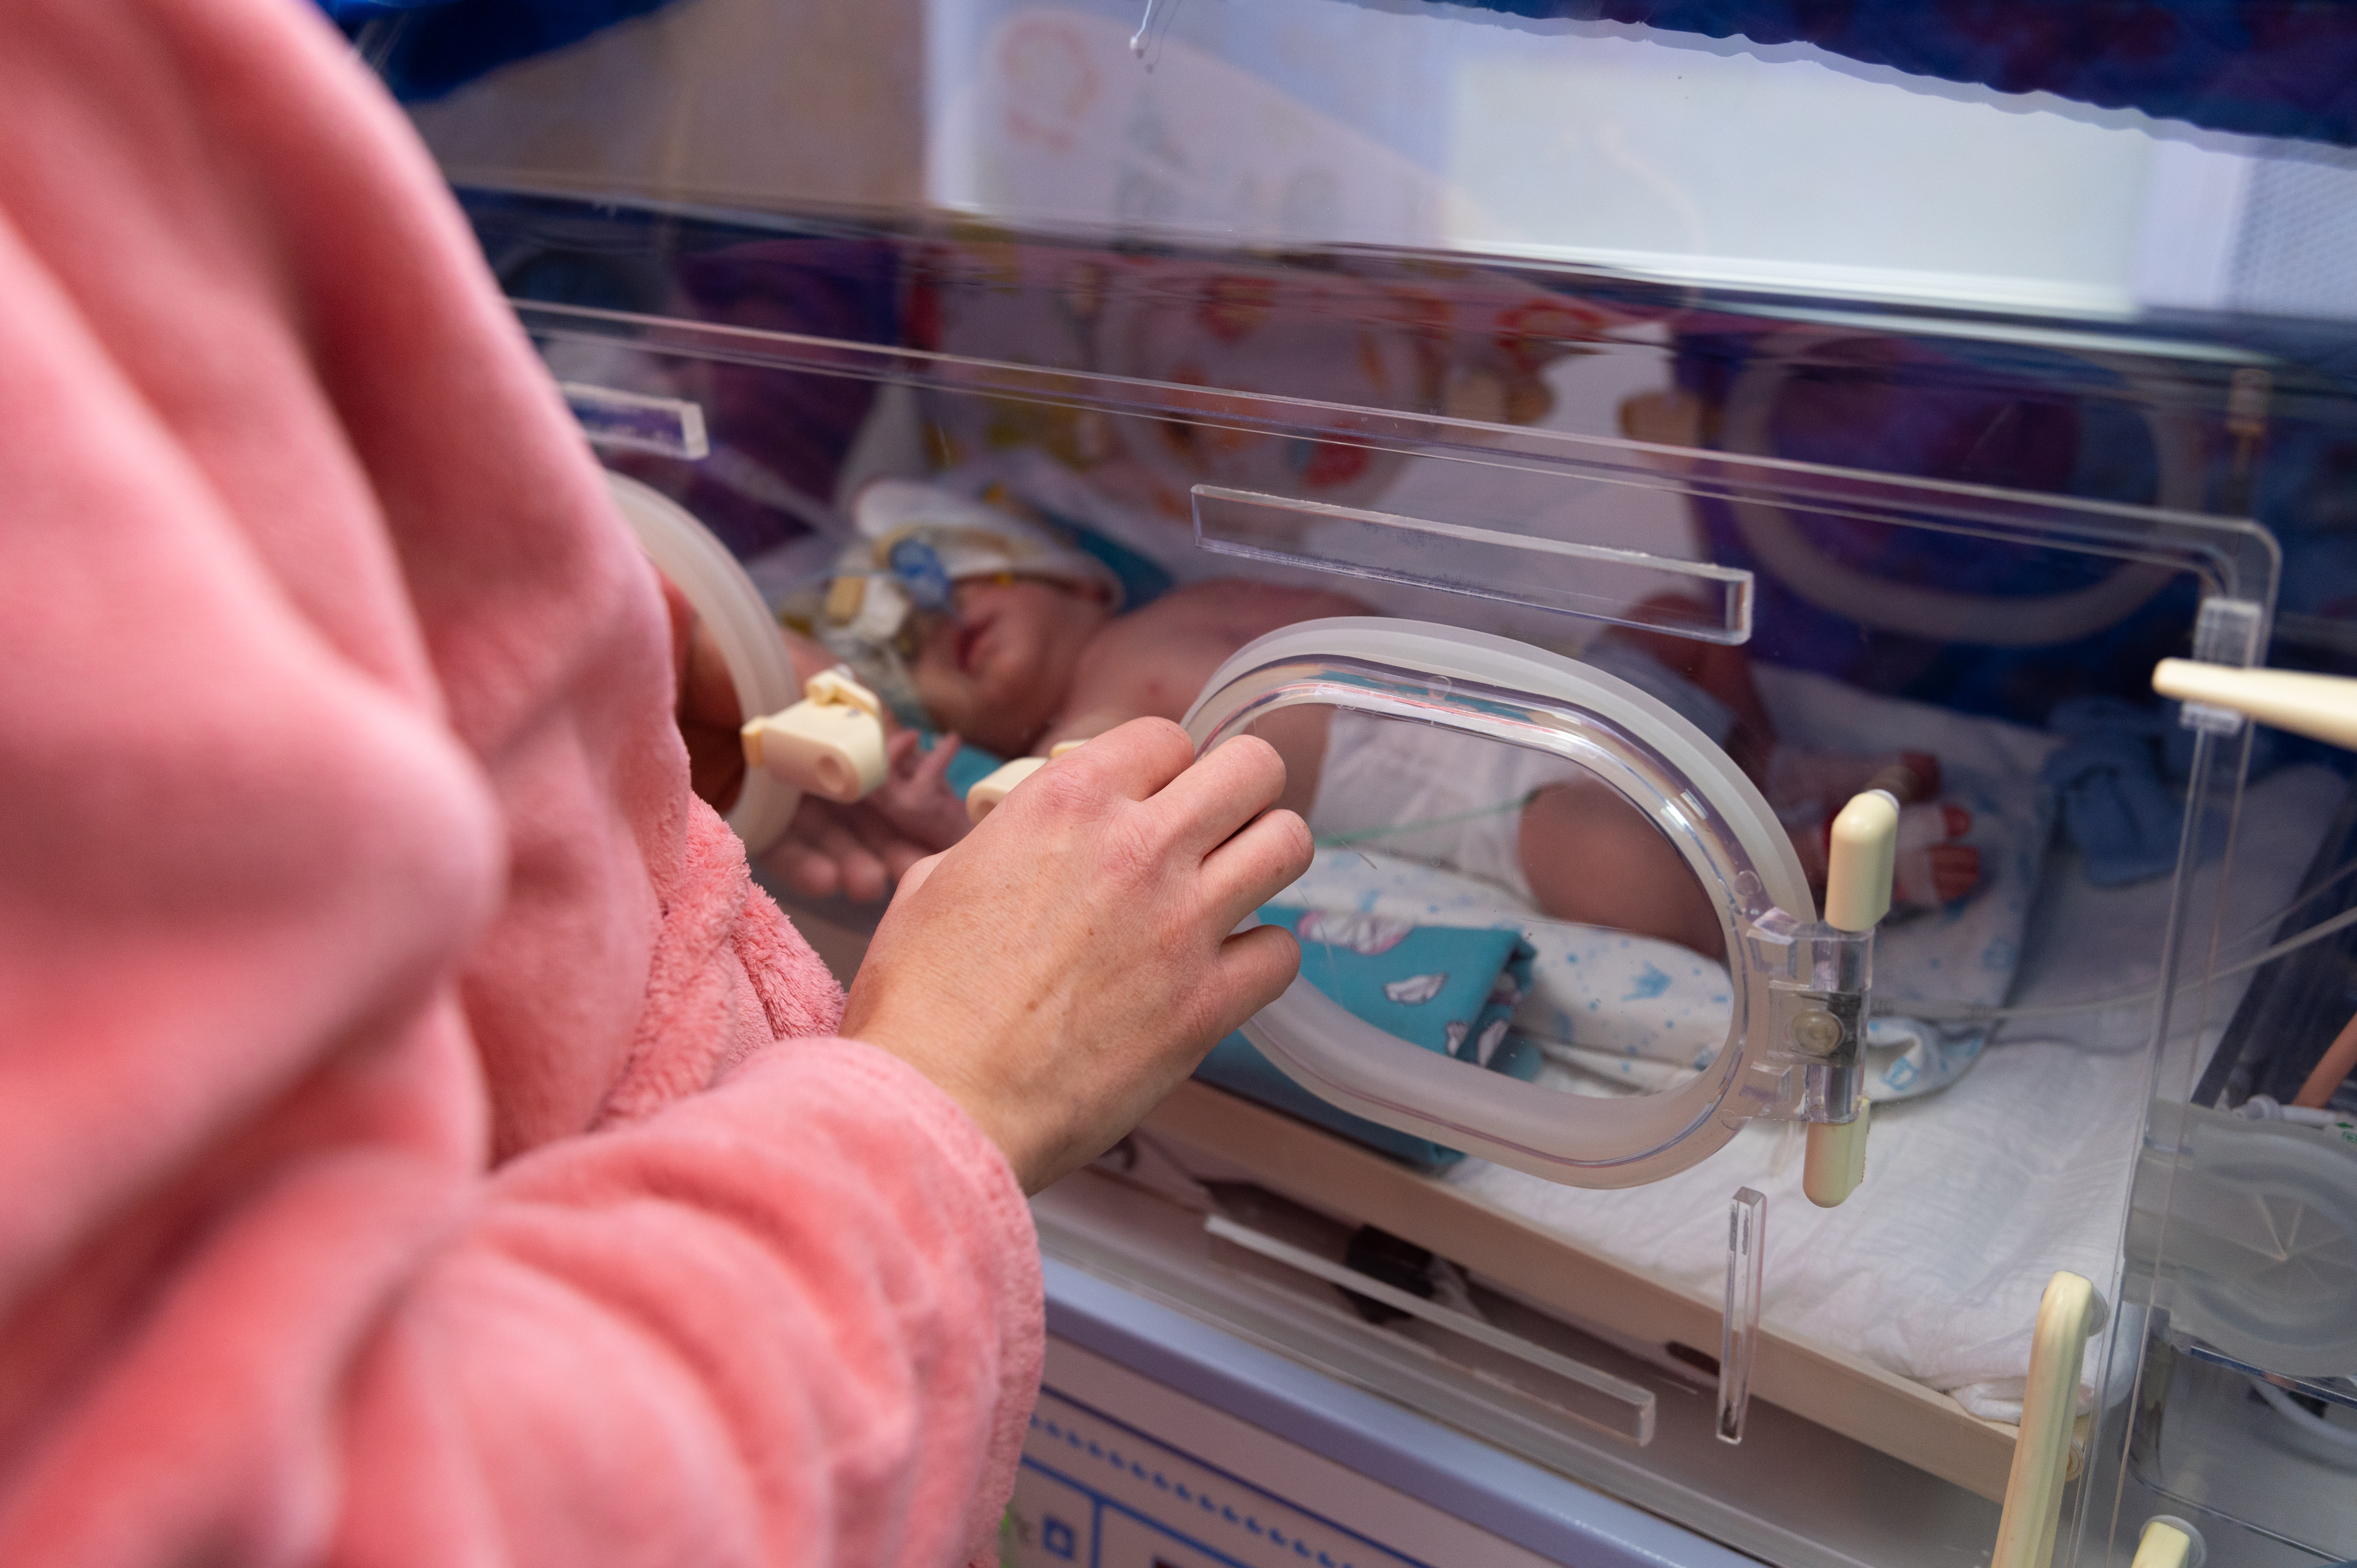 A baby breathes comfortably in an incubator